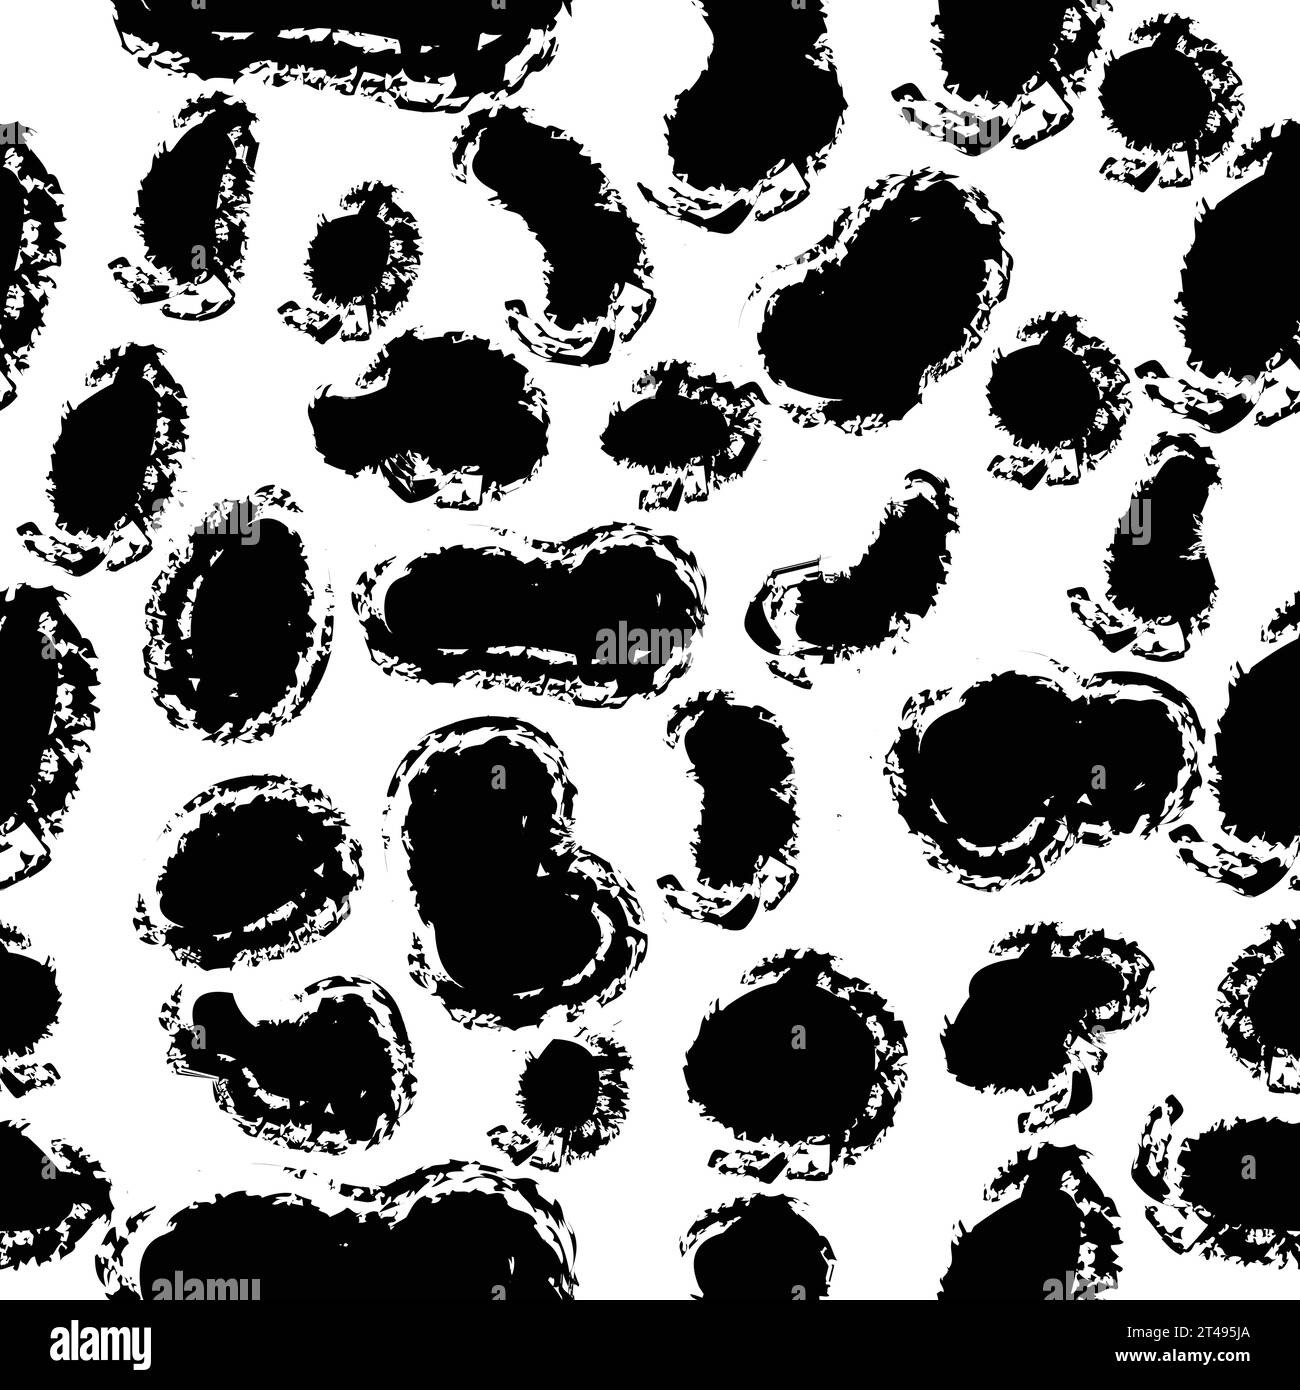 Black spots on white background seamless pattern; grungy stains made with brush monochrome pattern; Stock Vector